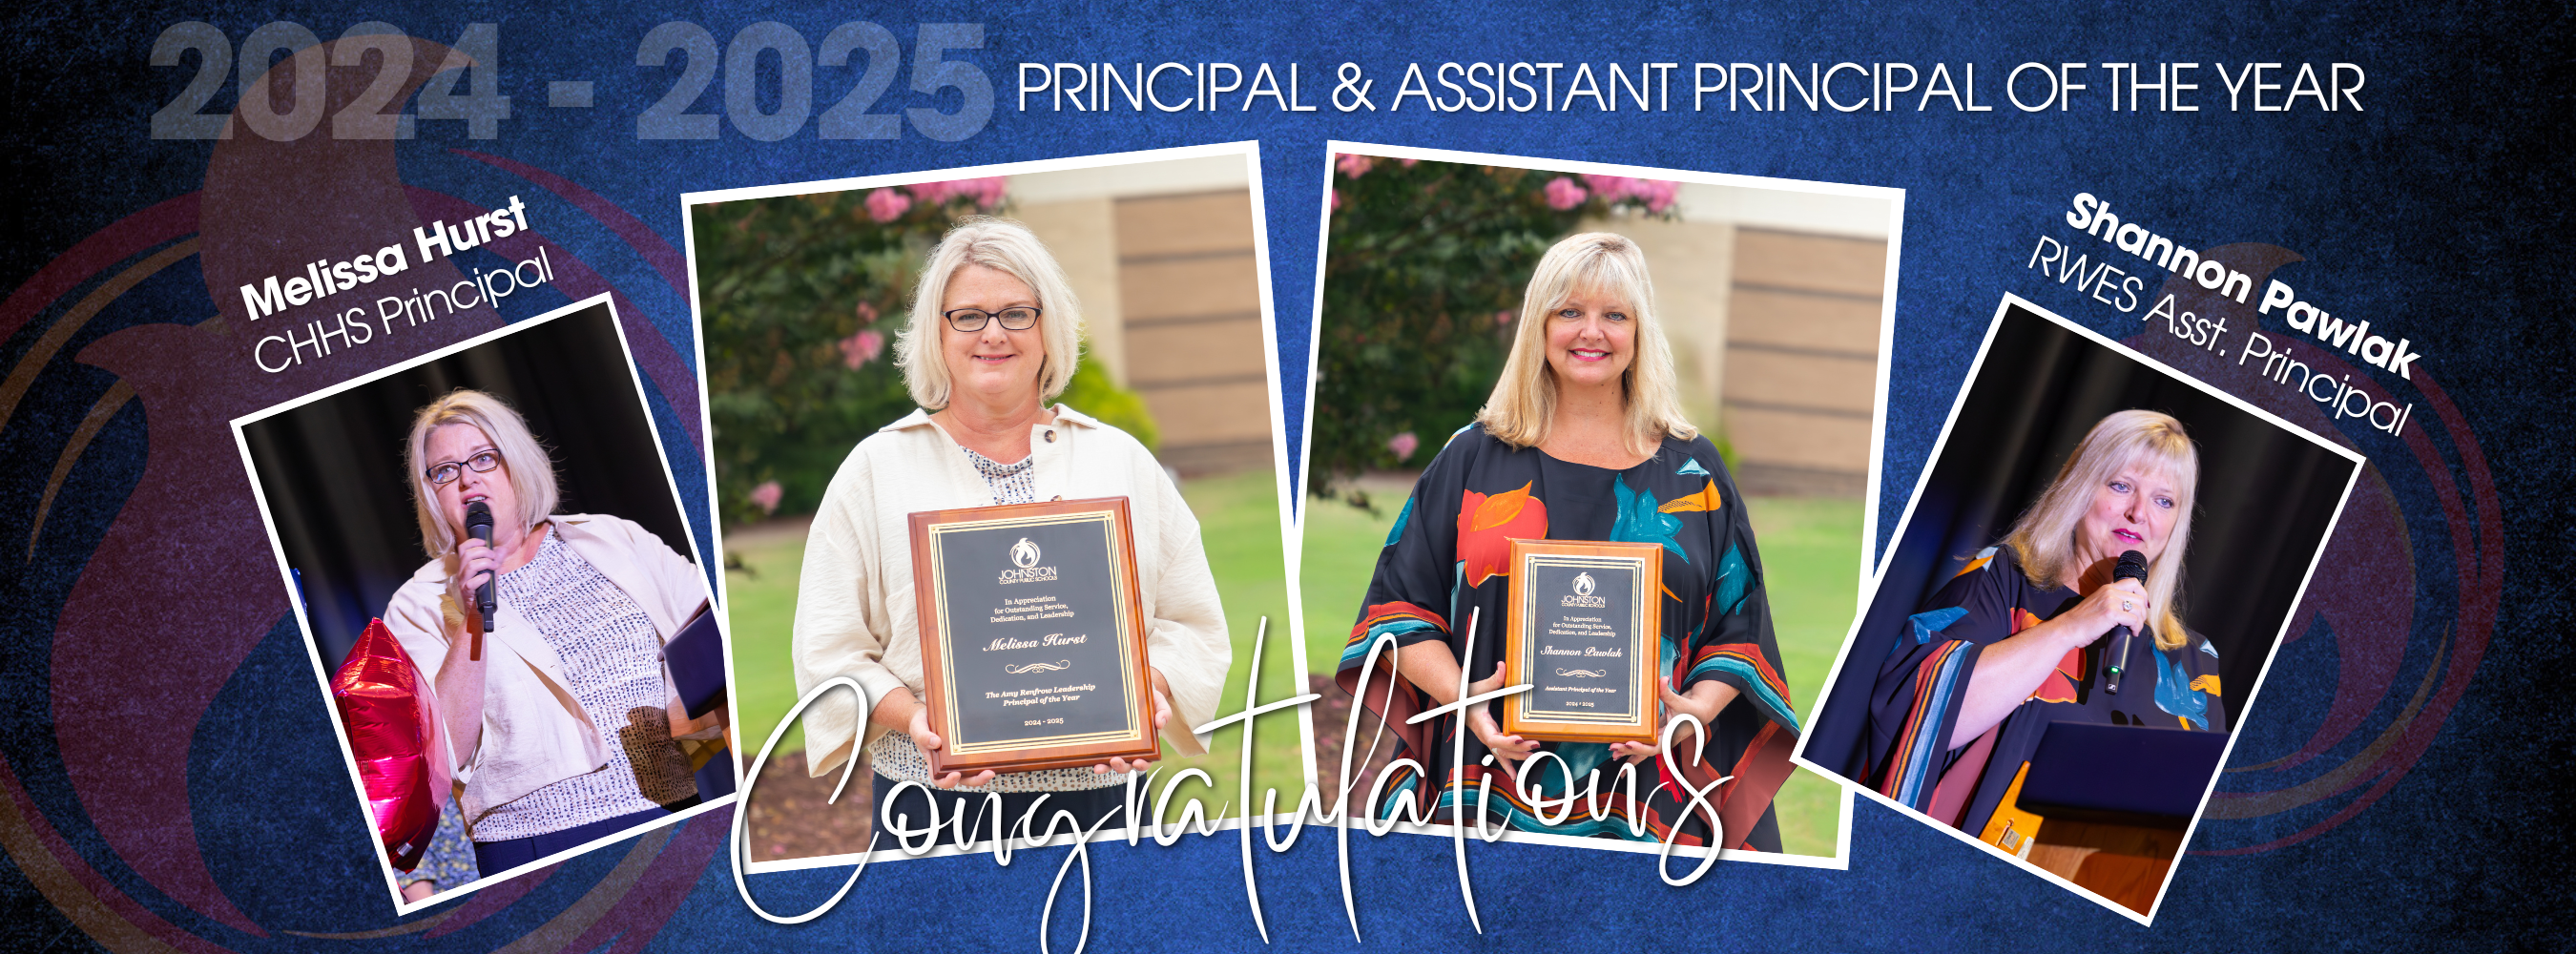 2024-2025 Principal and Asst. Principal of the Year - Melissa Hurst and Shannon Pawlak